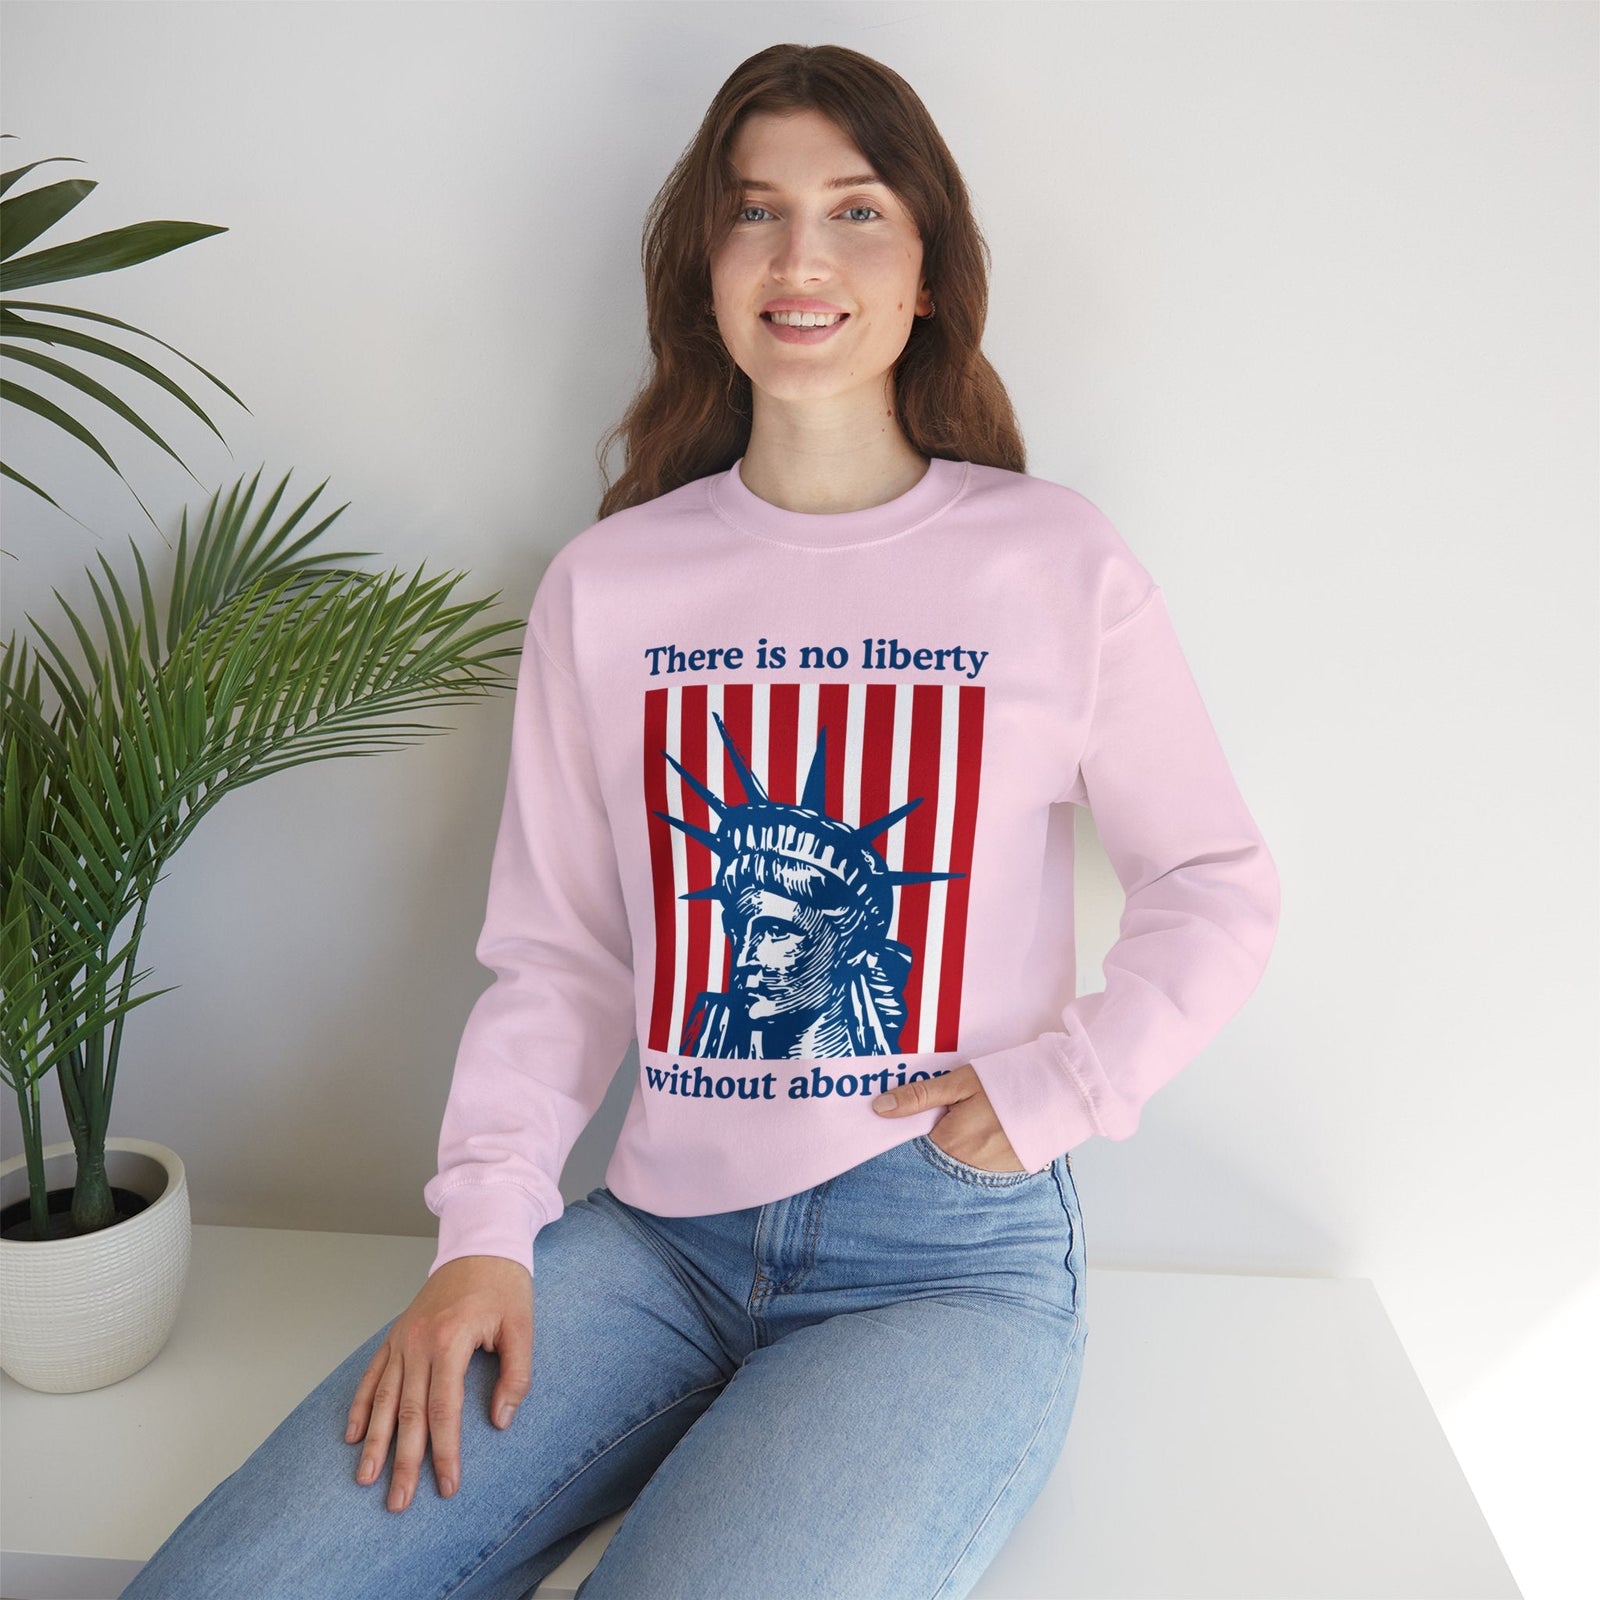 There is No Liberty Without Abortion Unisex Heavy Blend™ Crewneck Sweatshirt (Sizes S-5X)